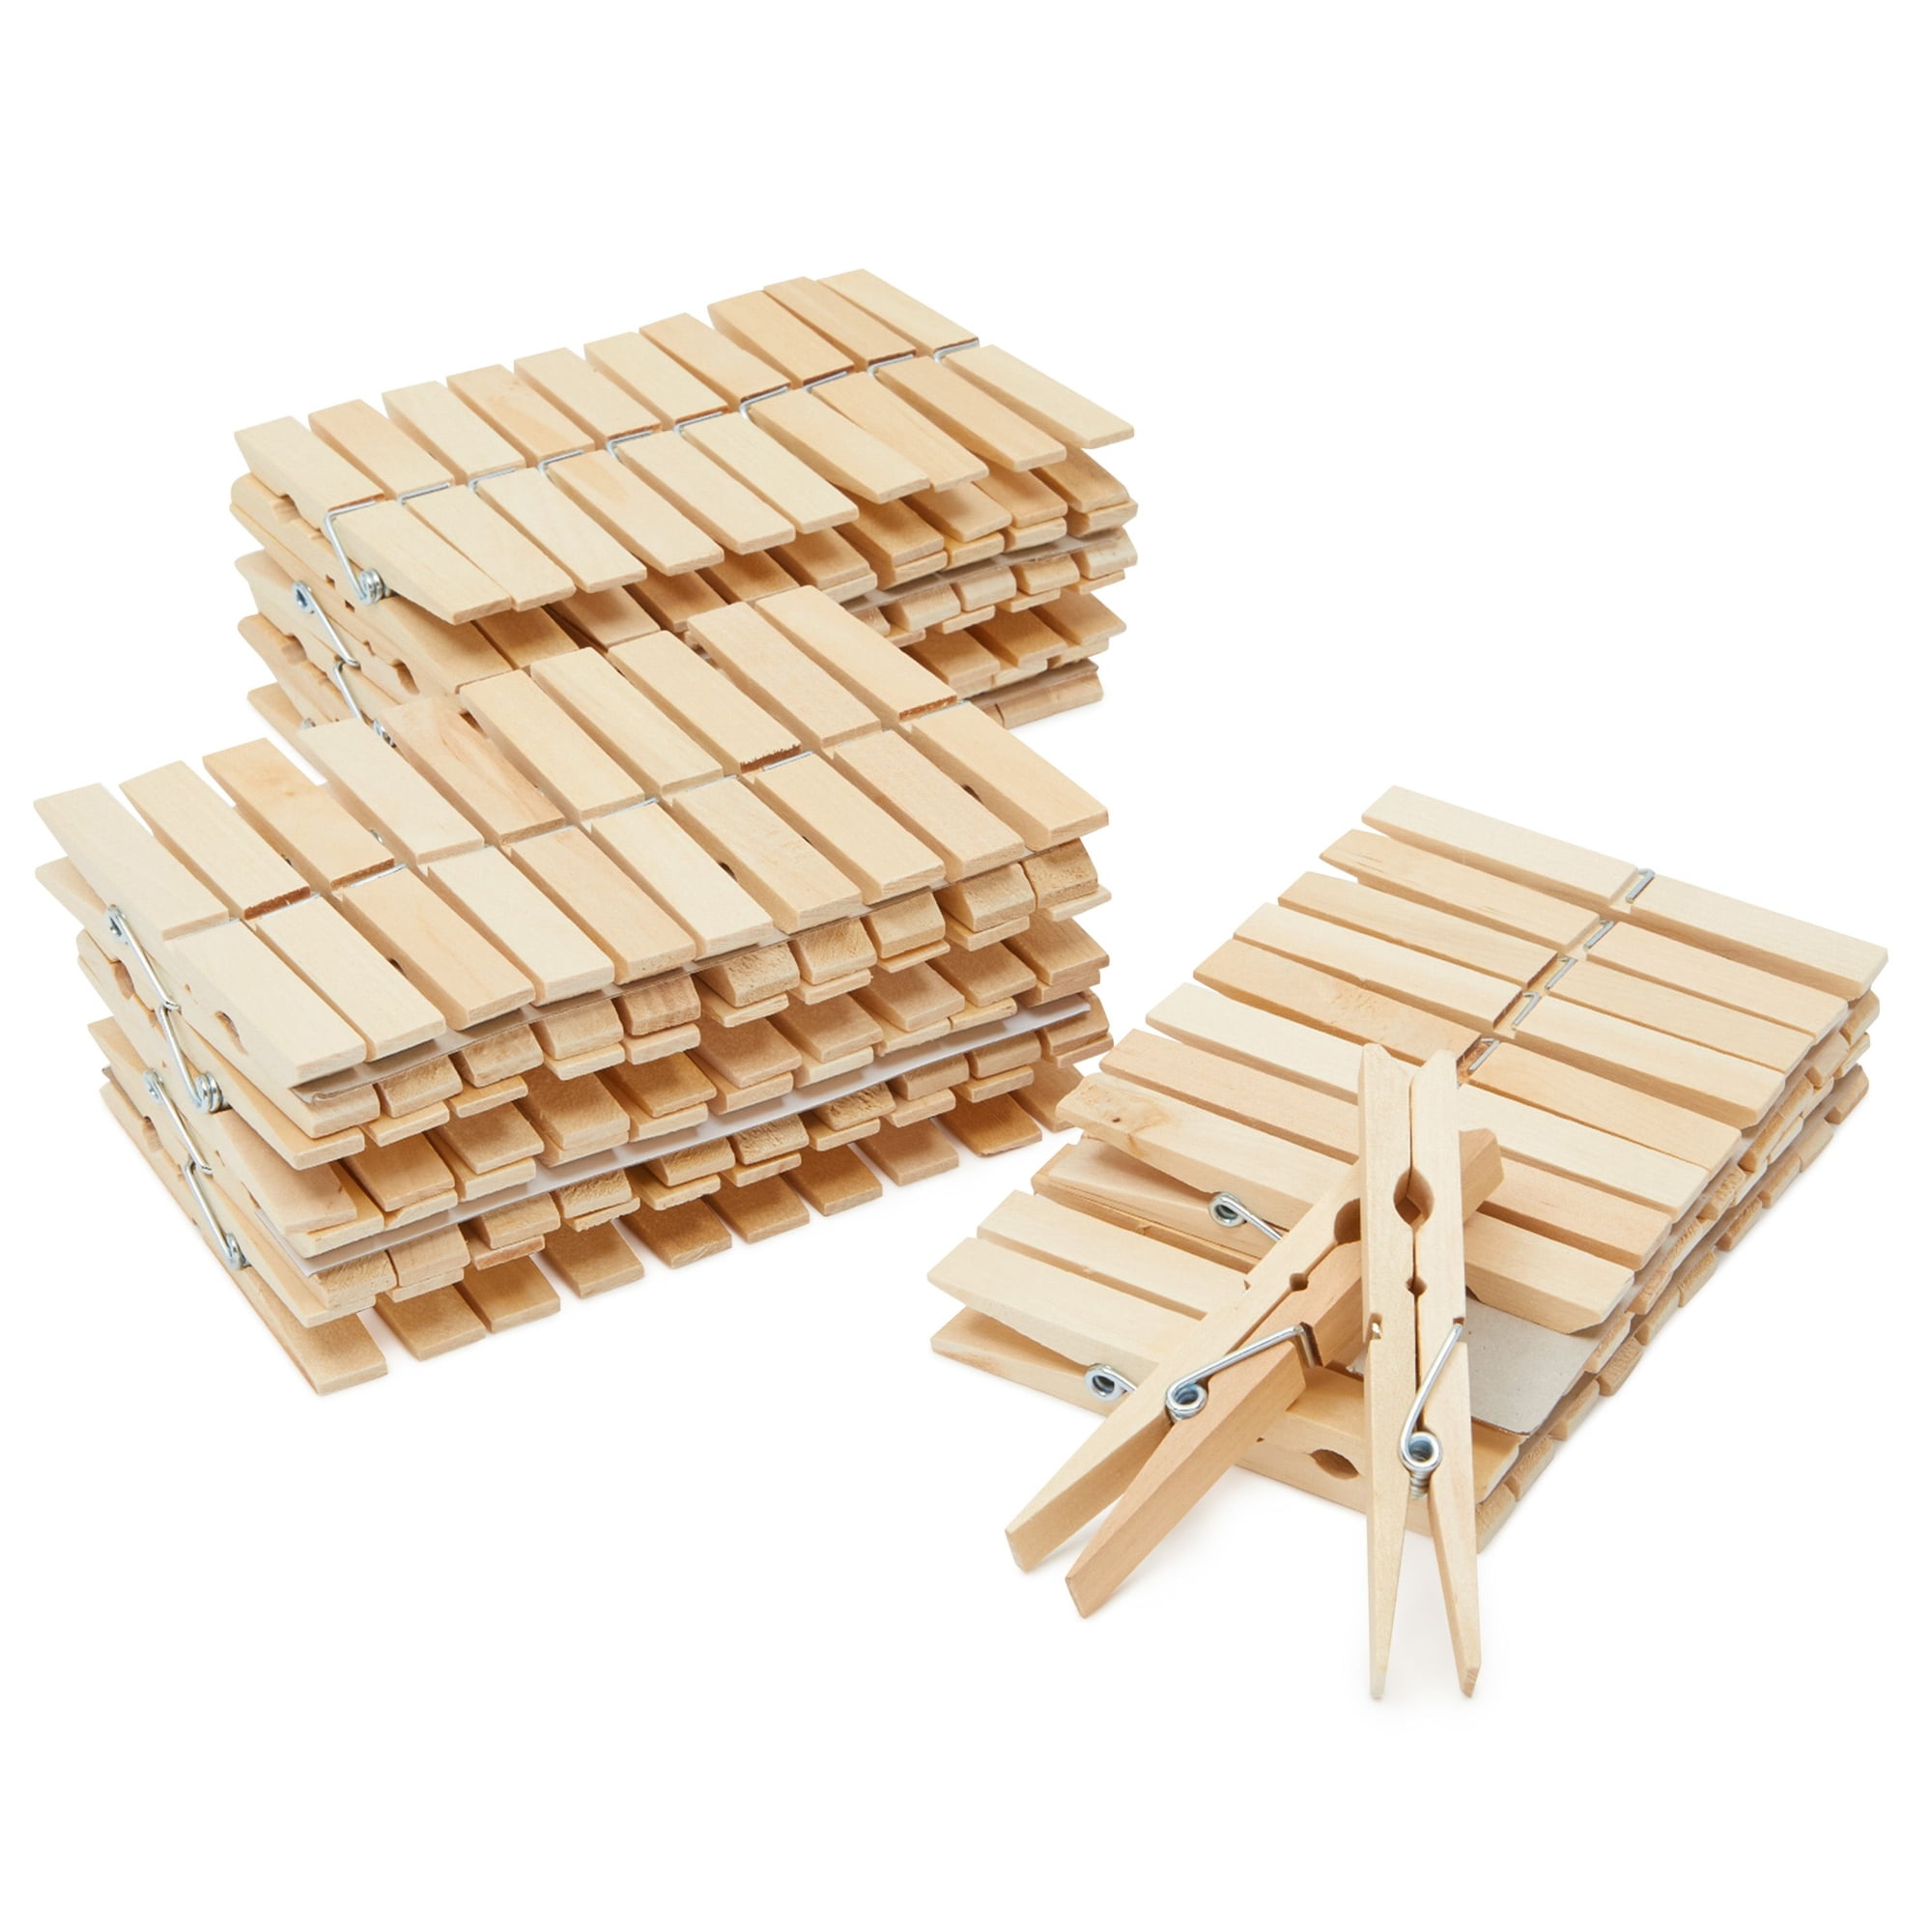 Handy Housewares 18-Piece Large 3.75 Long Wooden Clothespins, Great Wood Spring Clips for Everyday Clothes Hanging, Laundry, Towels, Crafts